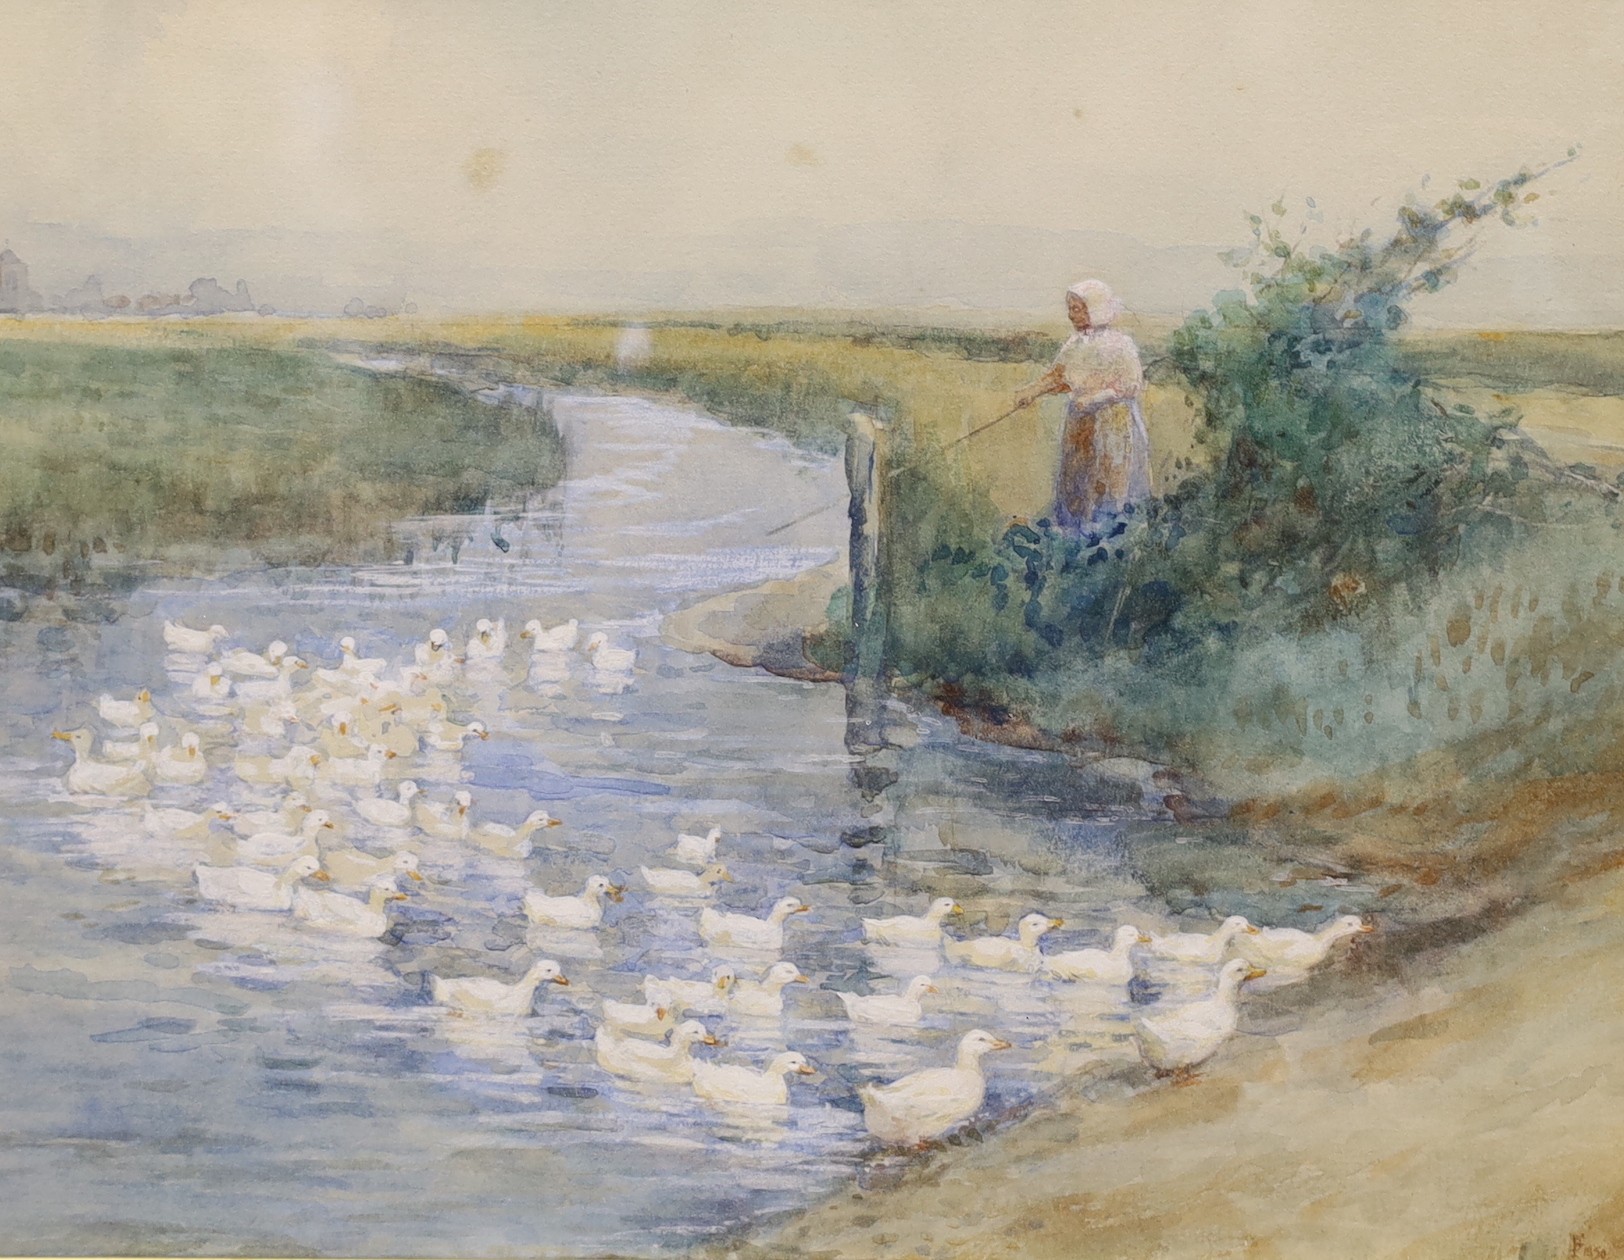 Circle of Myles Birket Foster, watercolour, 'Woman and ducks', bears monogram and date 1850, 22 x 29cm